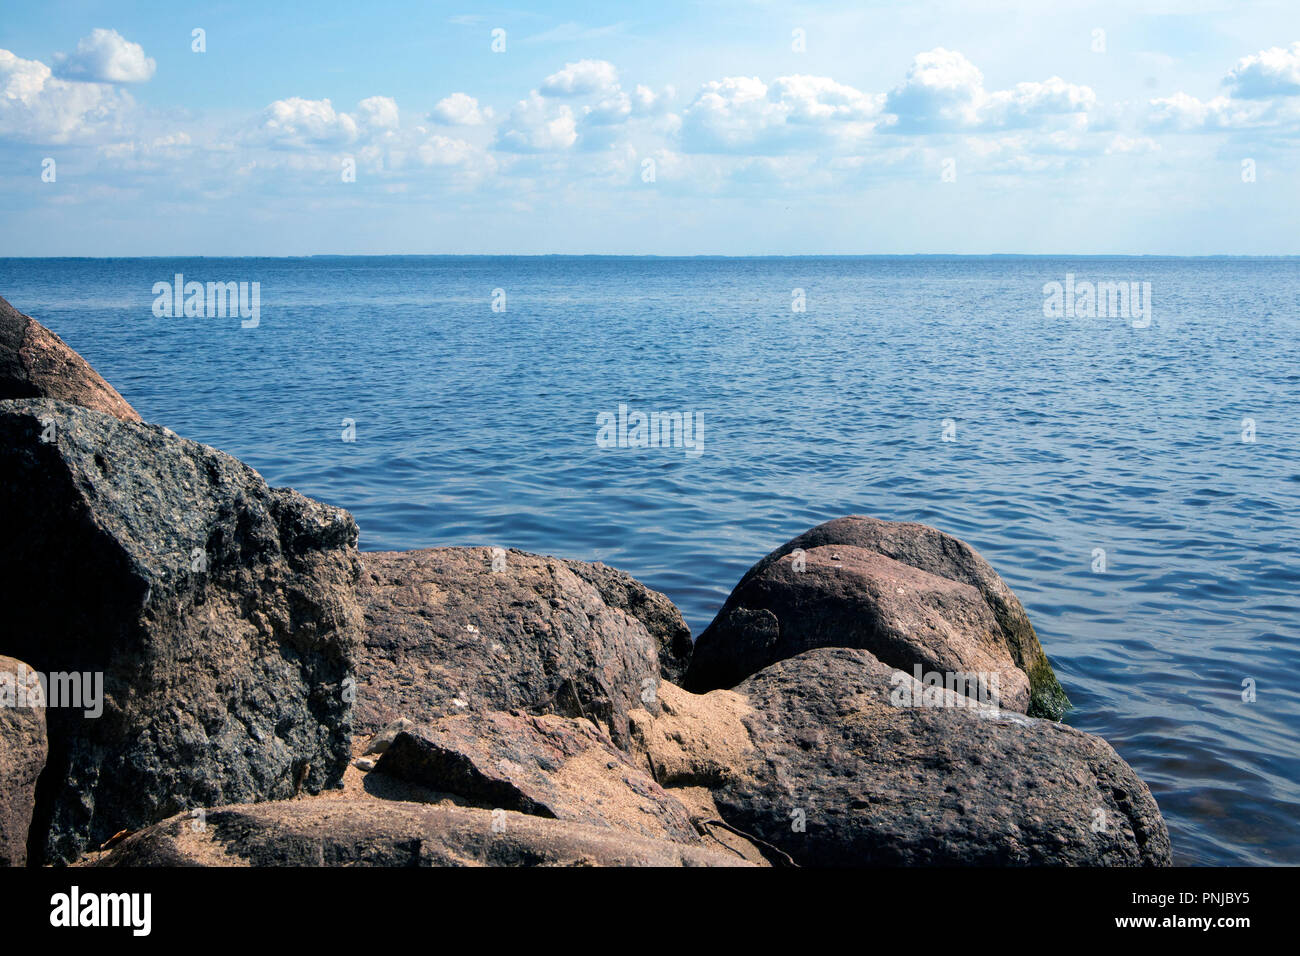 Scenic landscape with sandy shore, boulders, sea and sky, atmospheric view Stock Photo